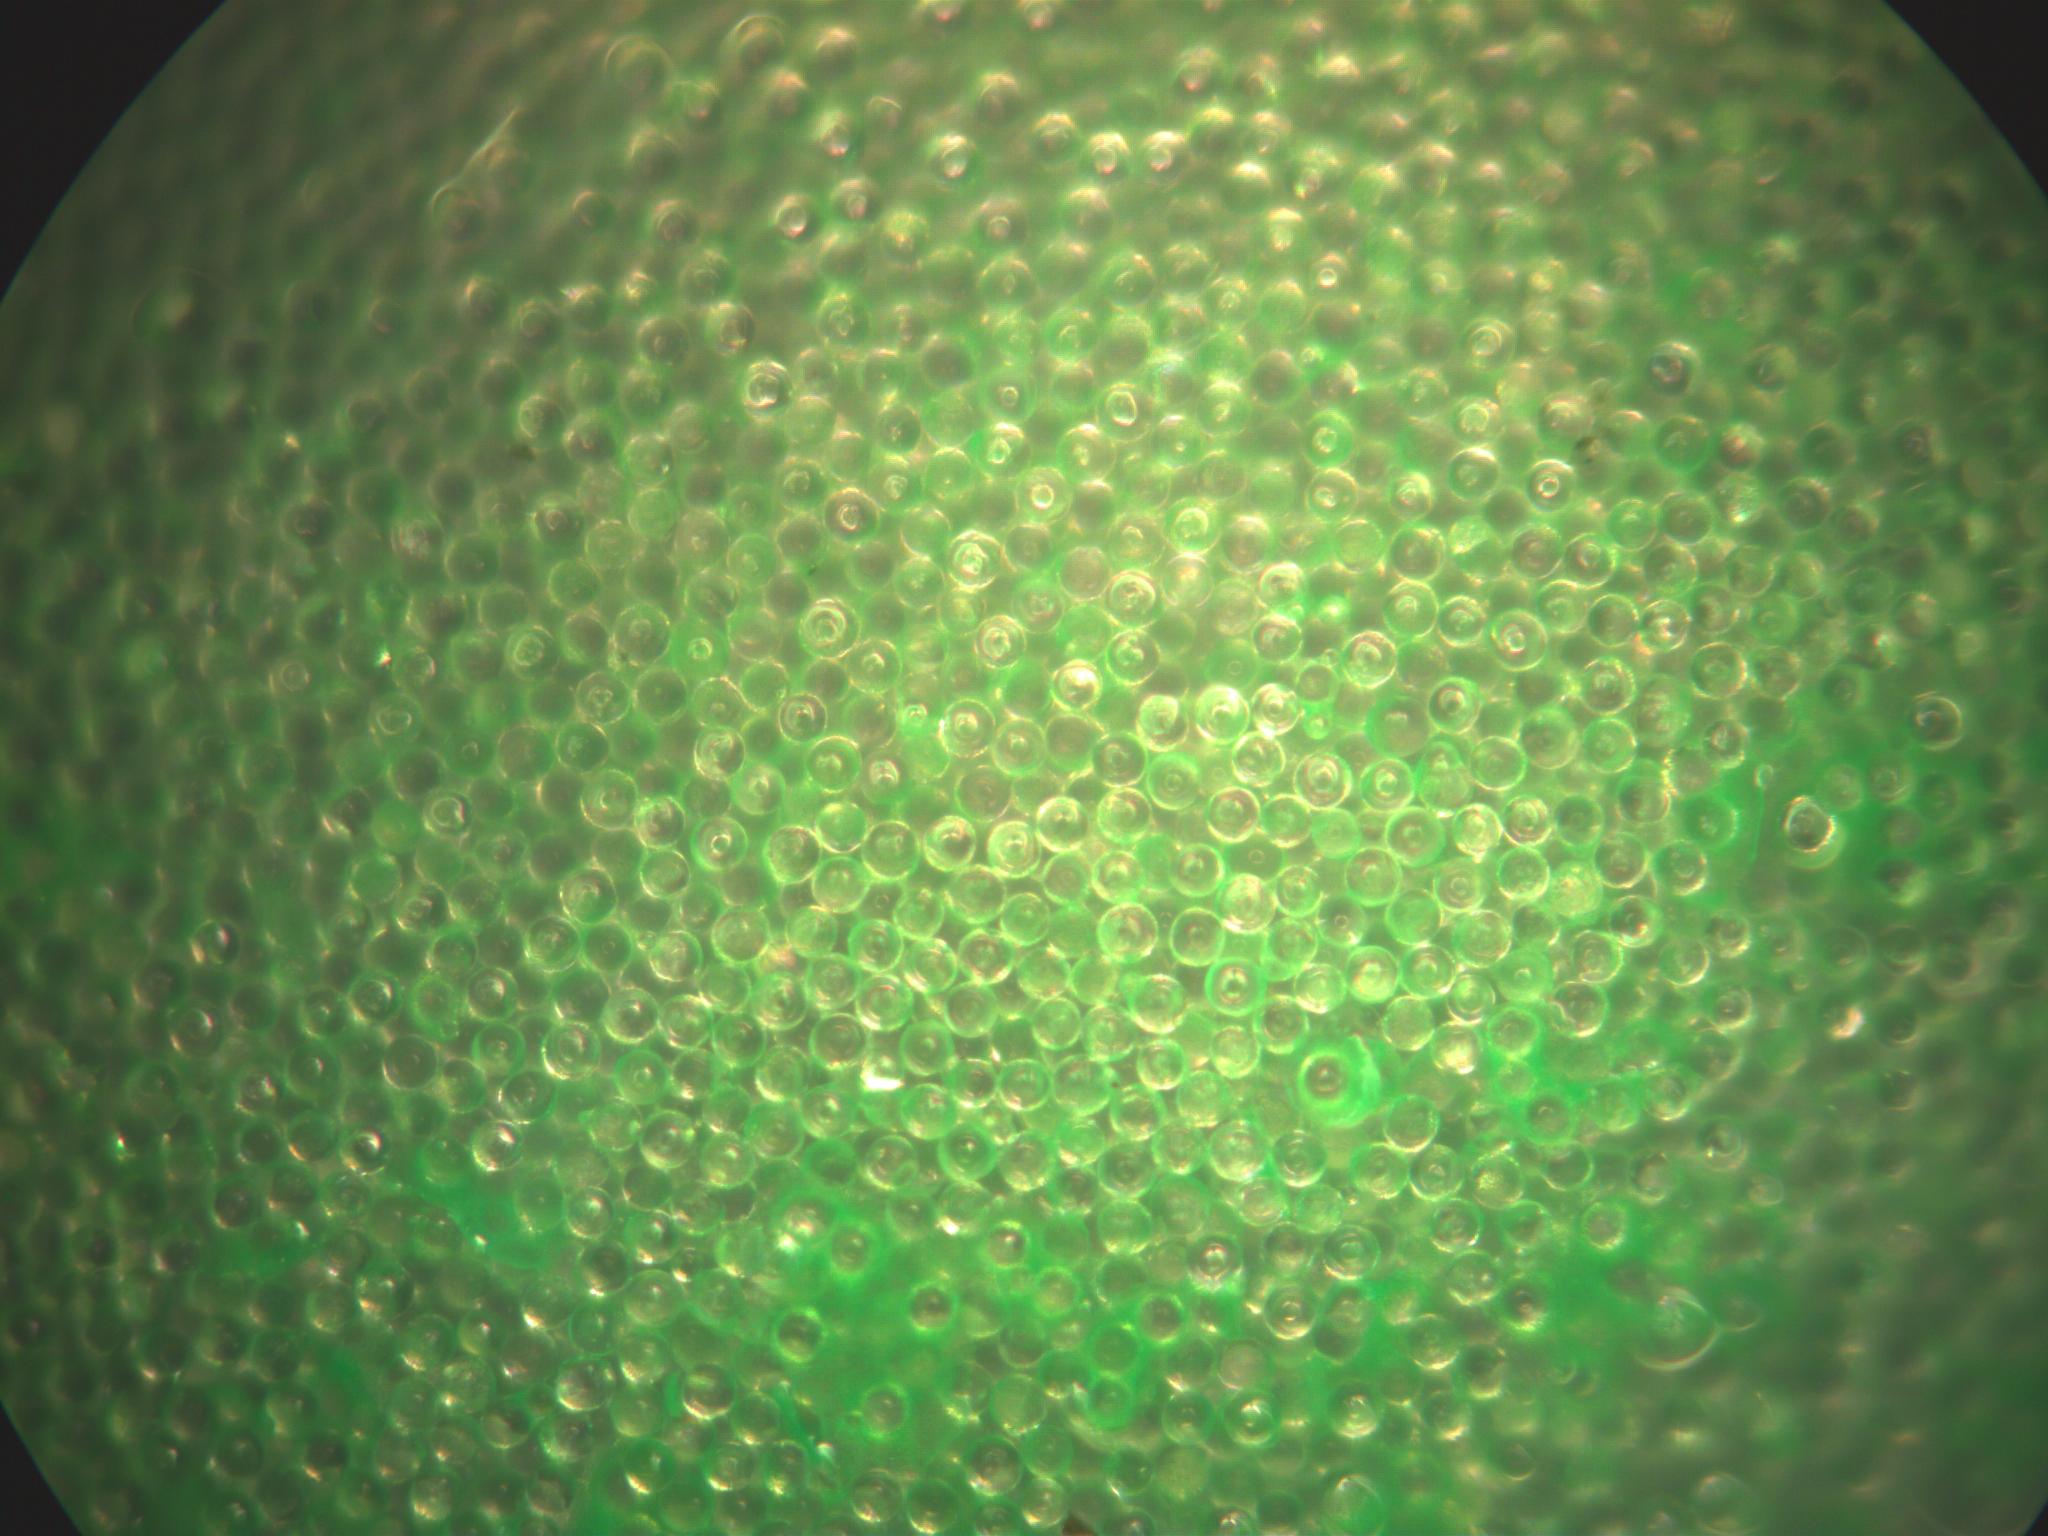 Green Fluorescent  Hemispherical Coating on Solid Glass Microspheres 45-53 micron - 100X magnification